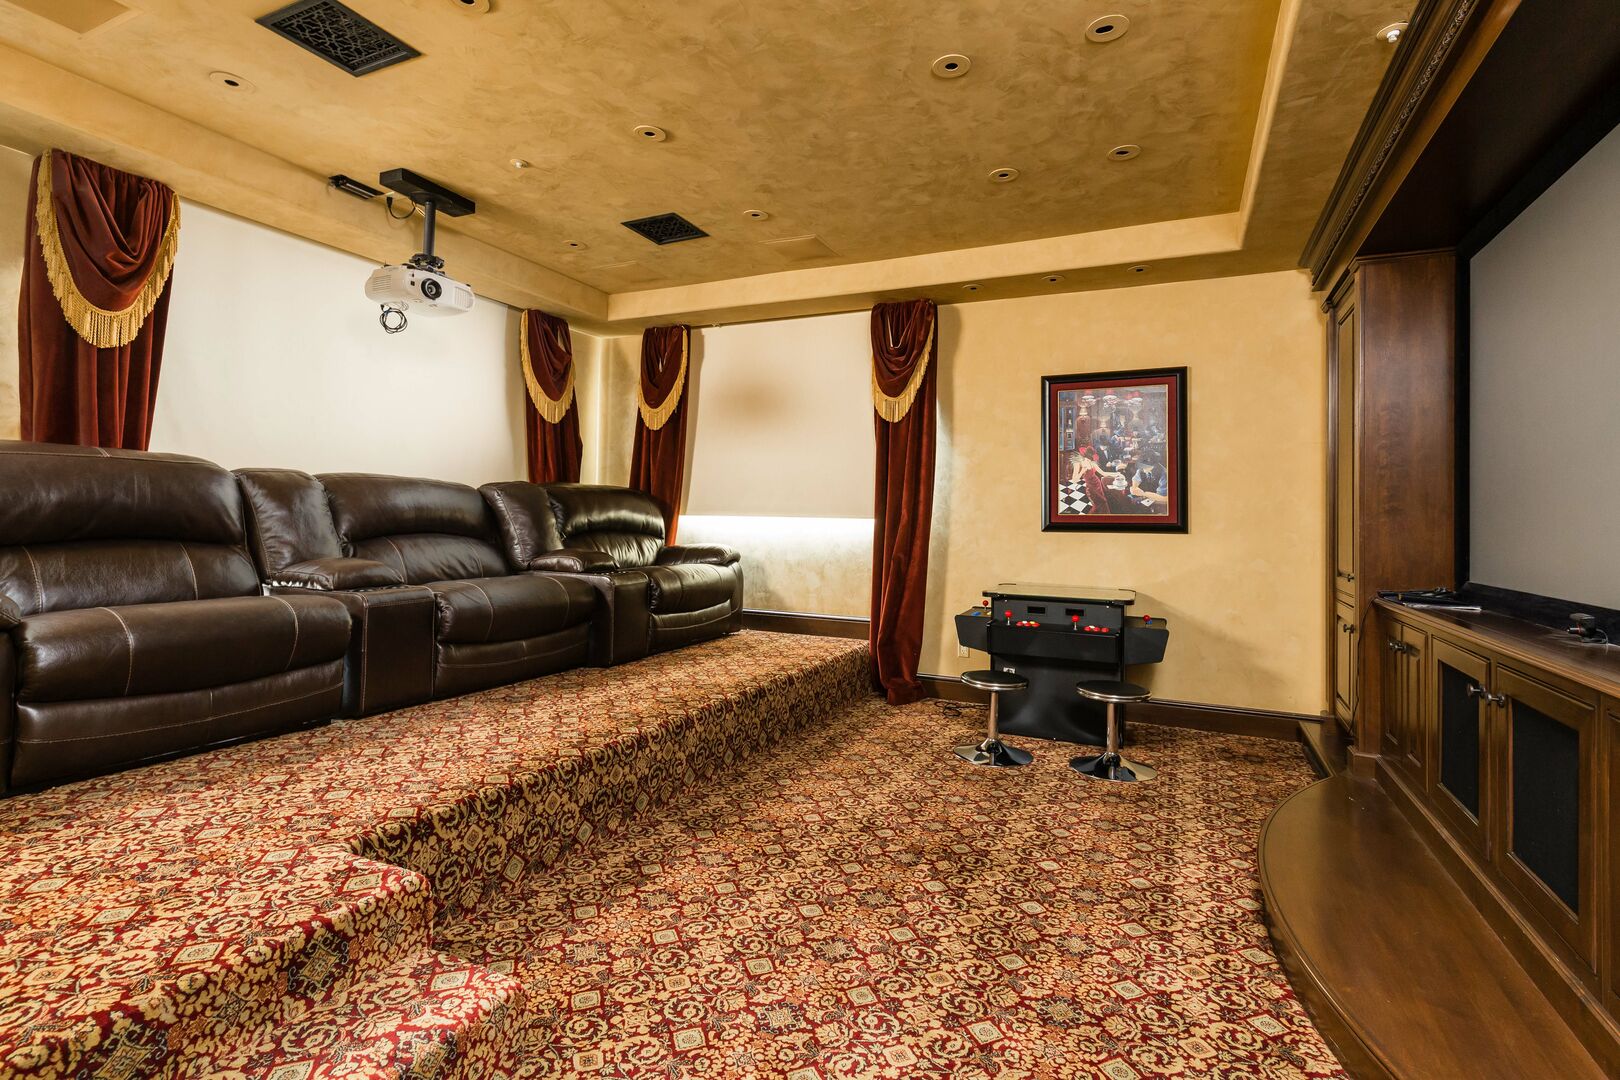 Movie Theatre room with a large projector and screen, comfortable movie recliners and classic arcade games.